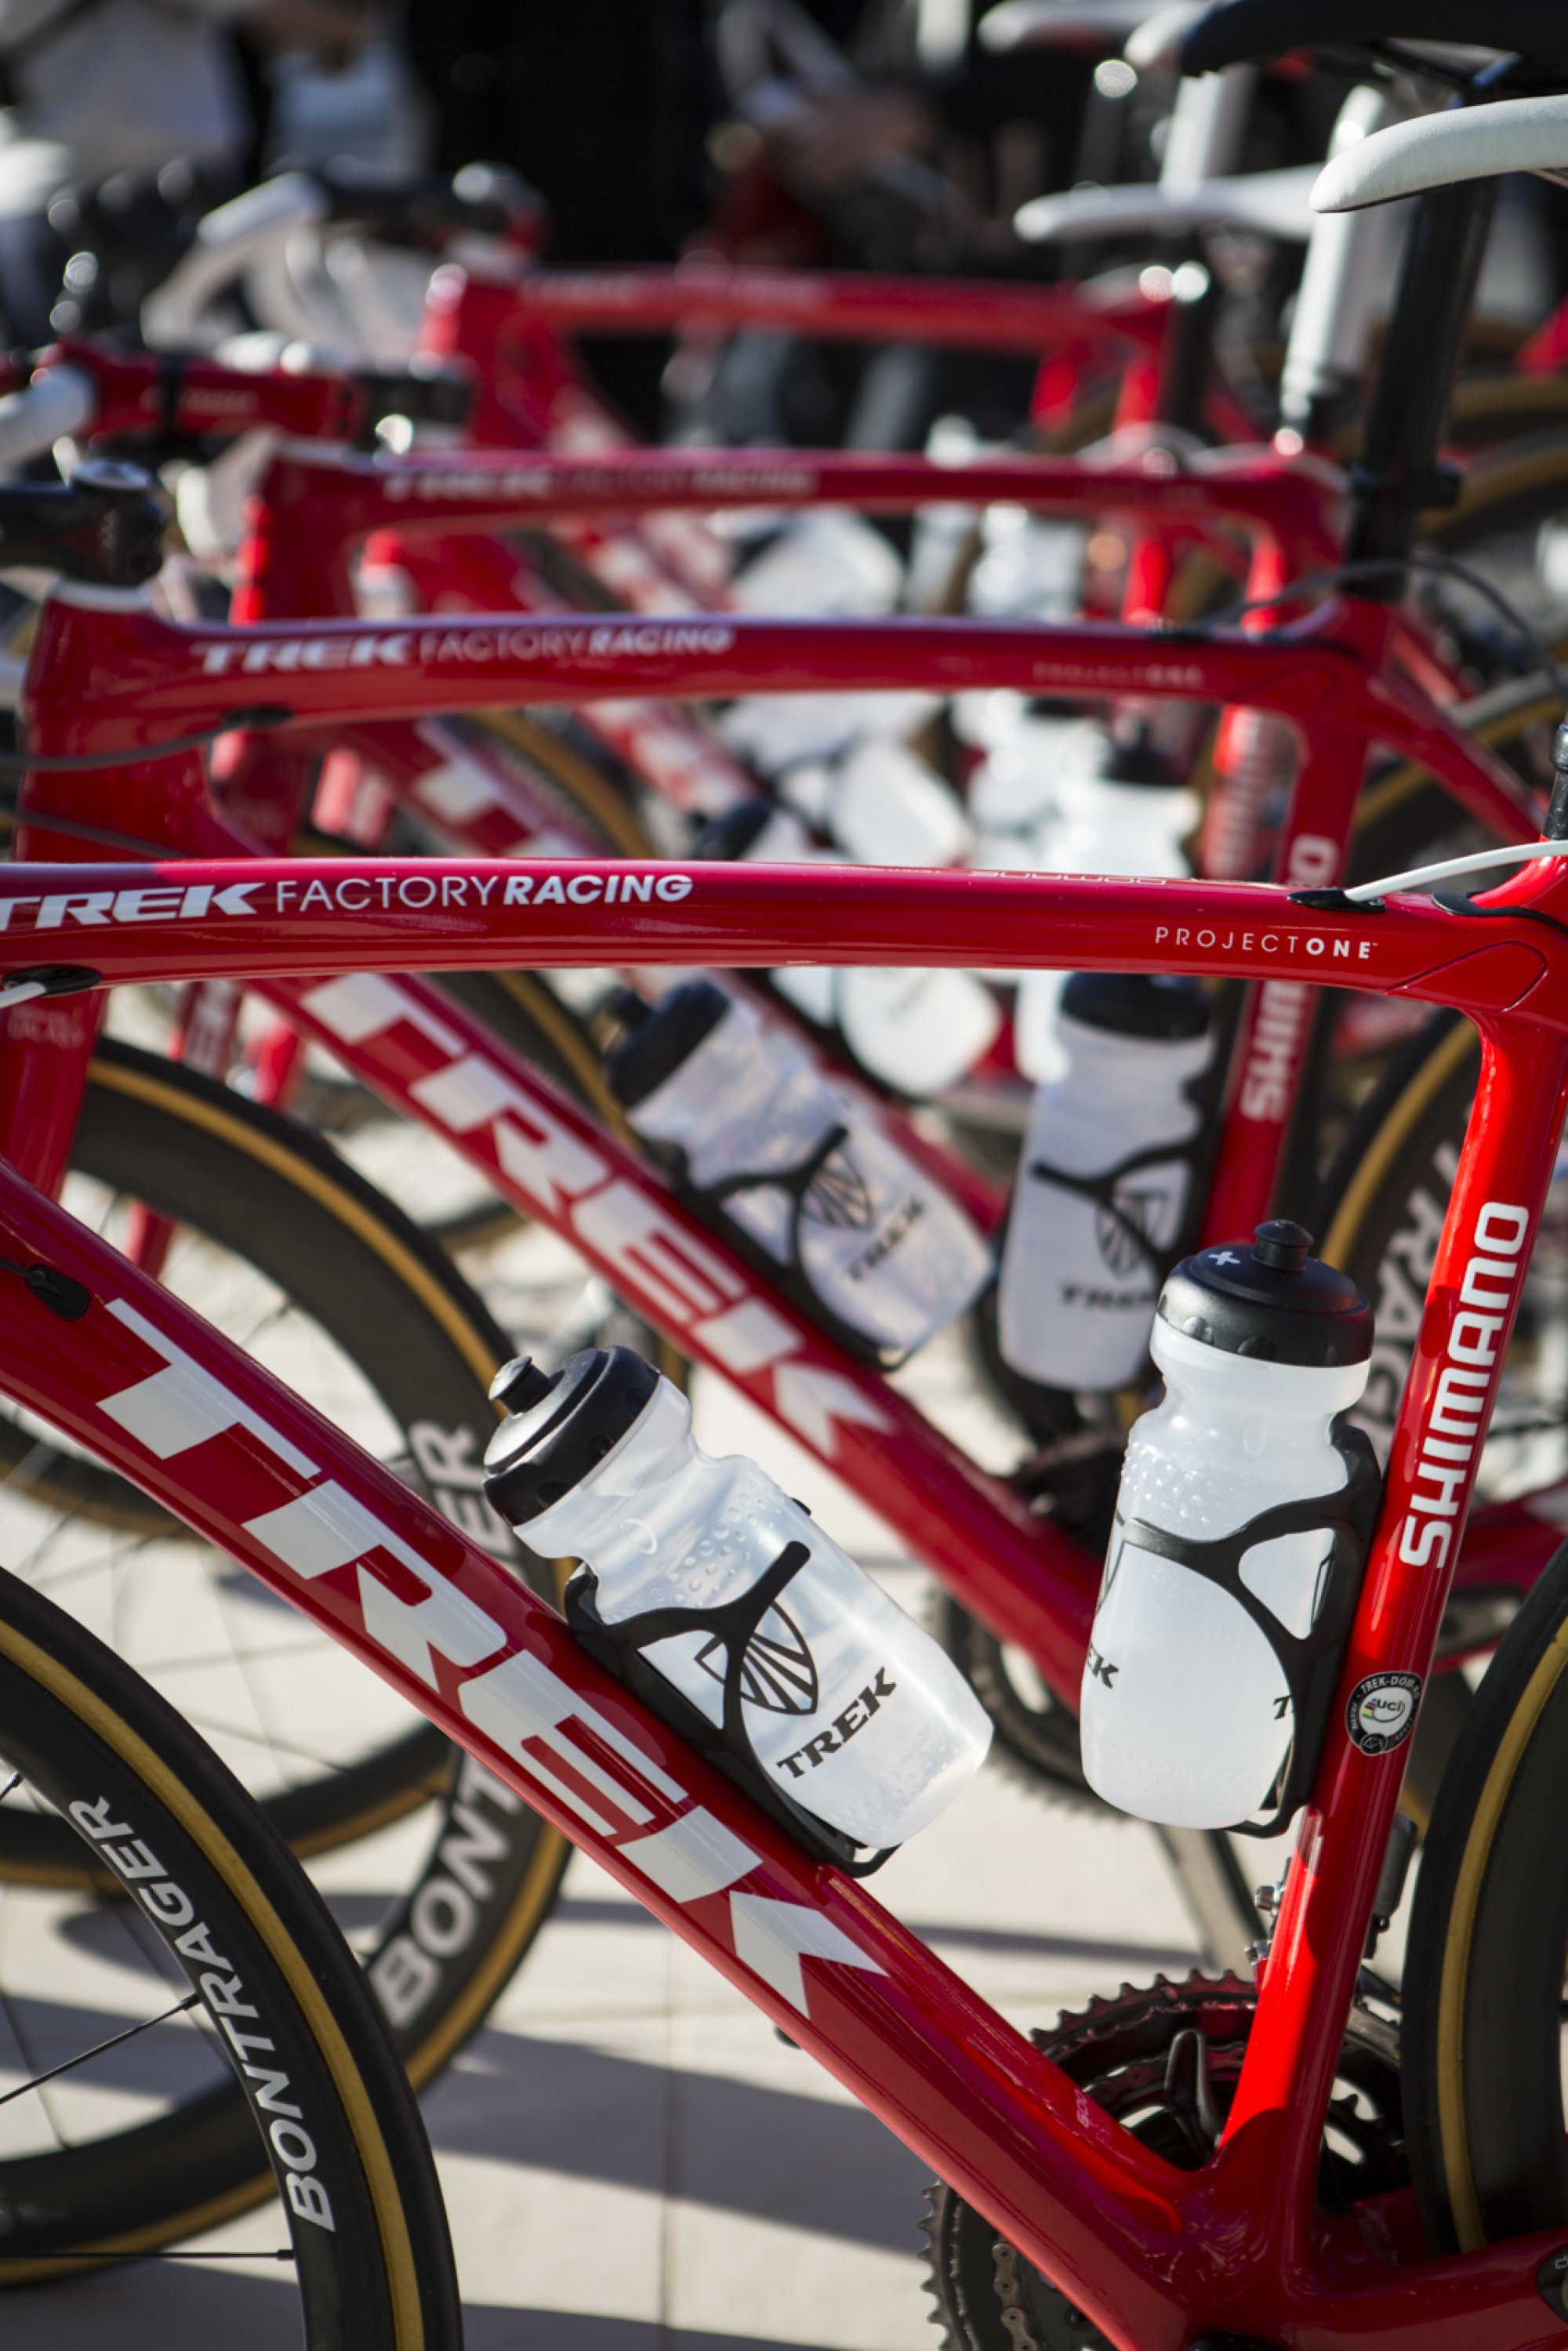 Trek Factory Racing in the red for 2015 | road.cc